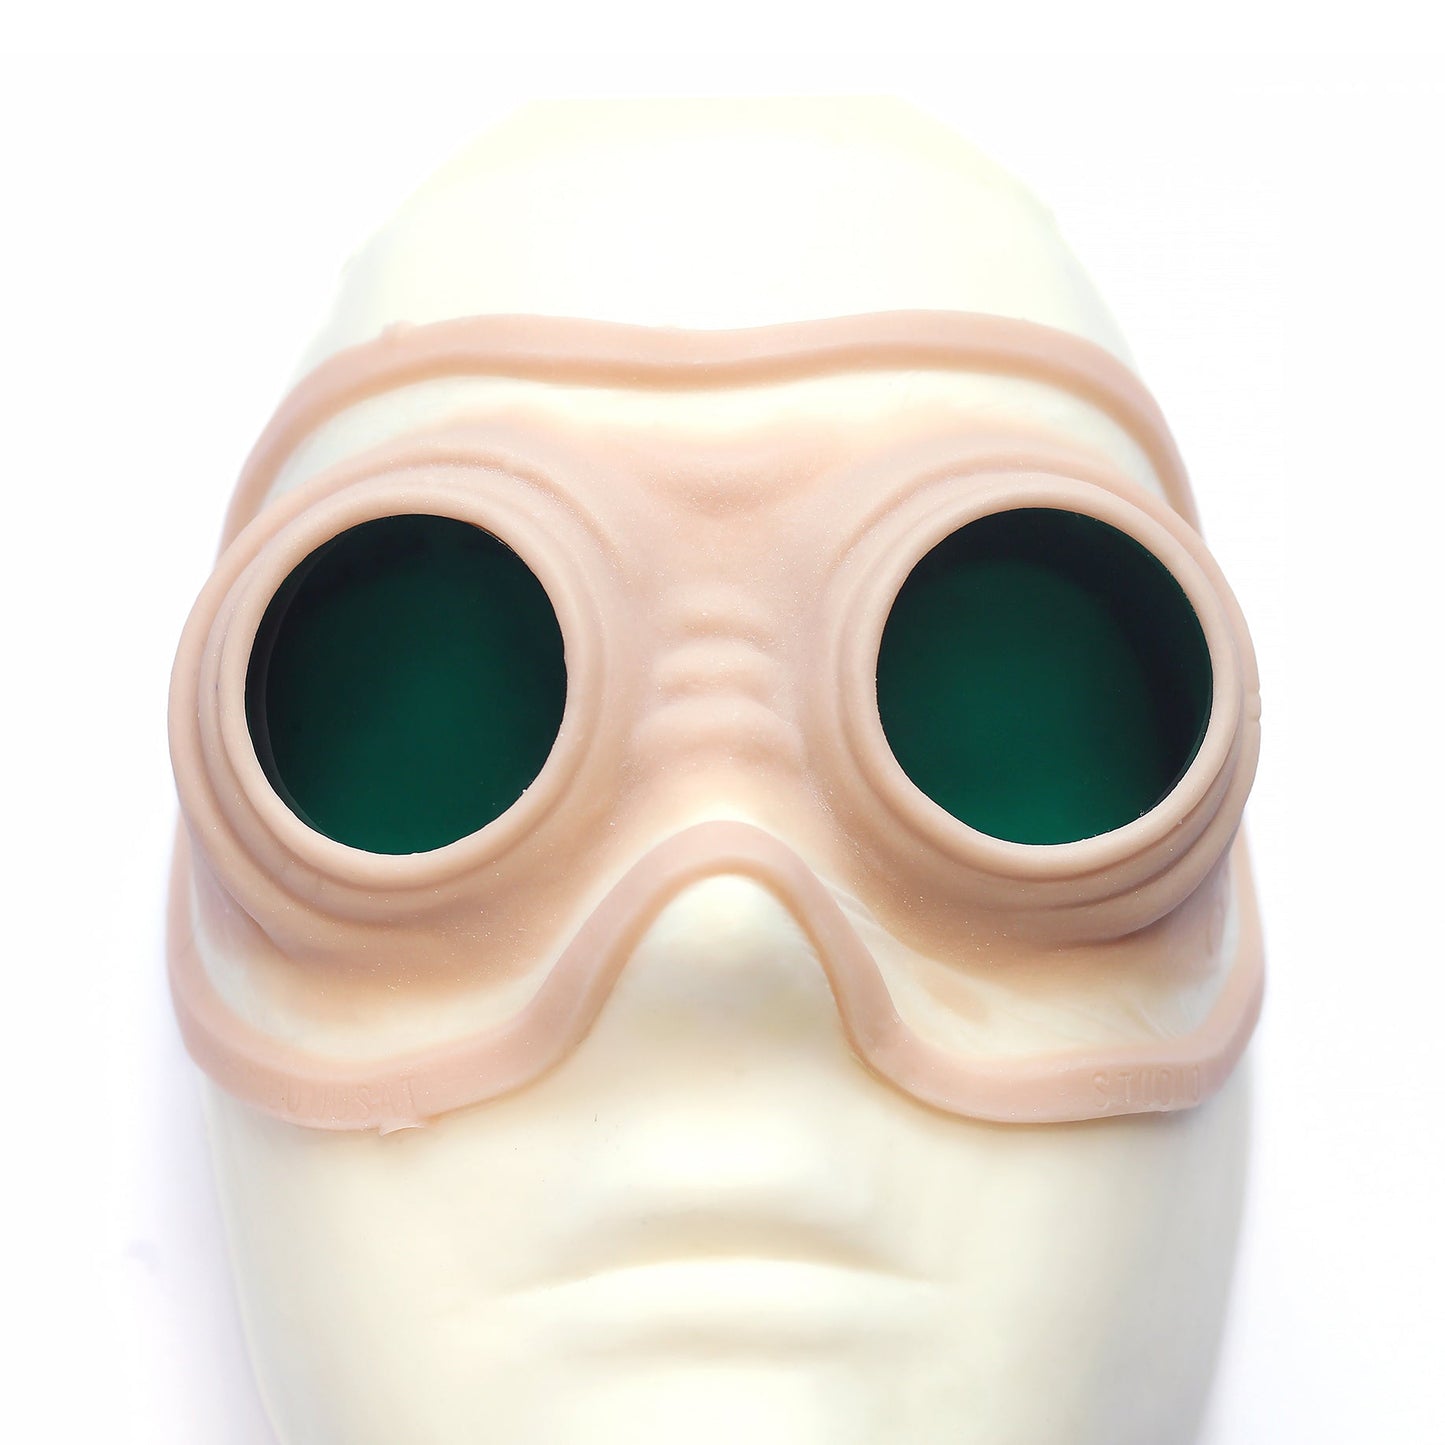 Steampunk Goggles - Silicone makeup prosthetic in vanilla shade on a white surface